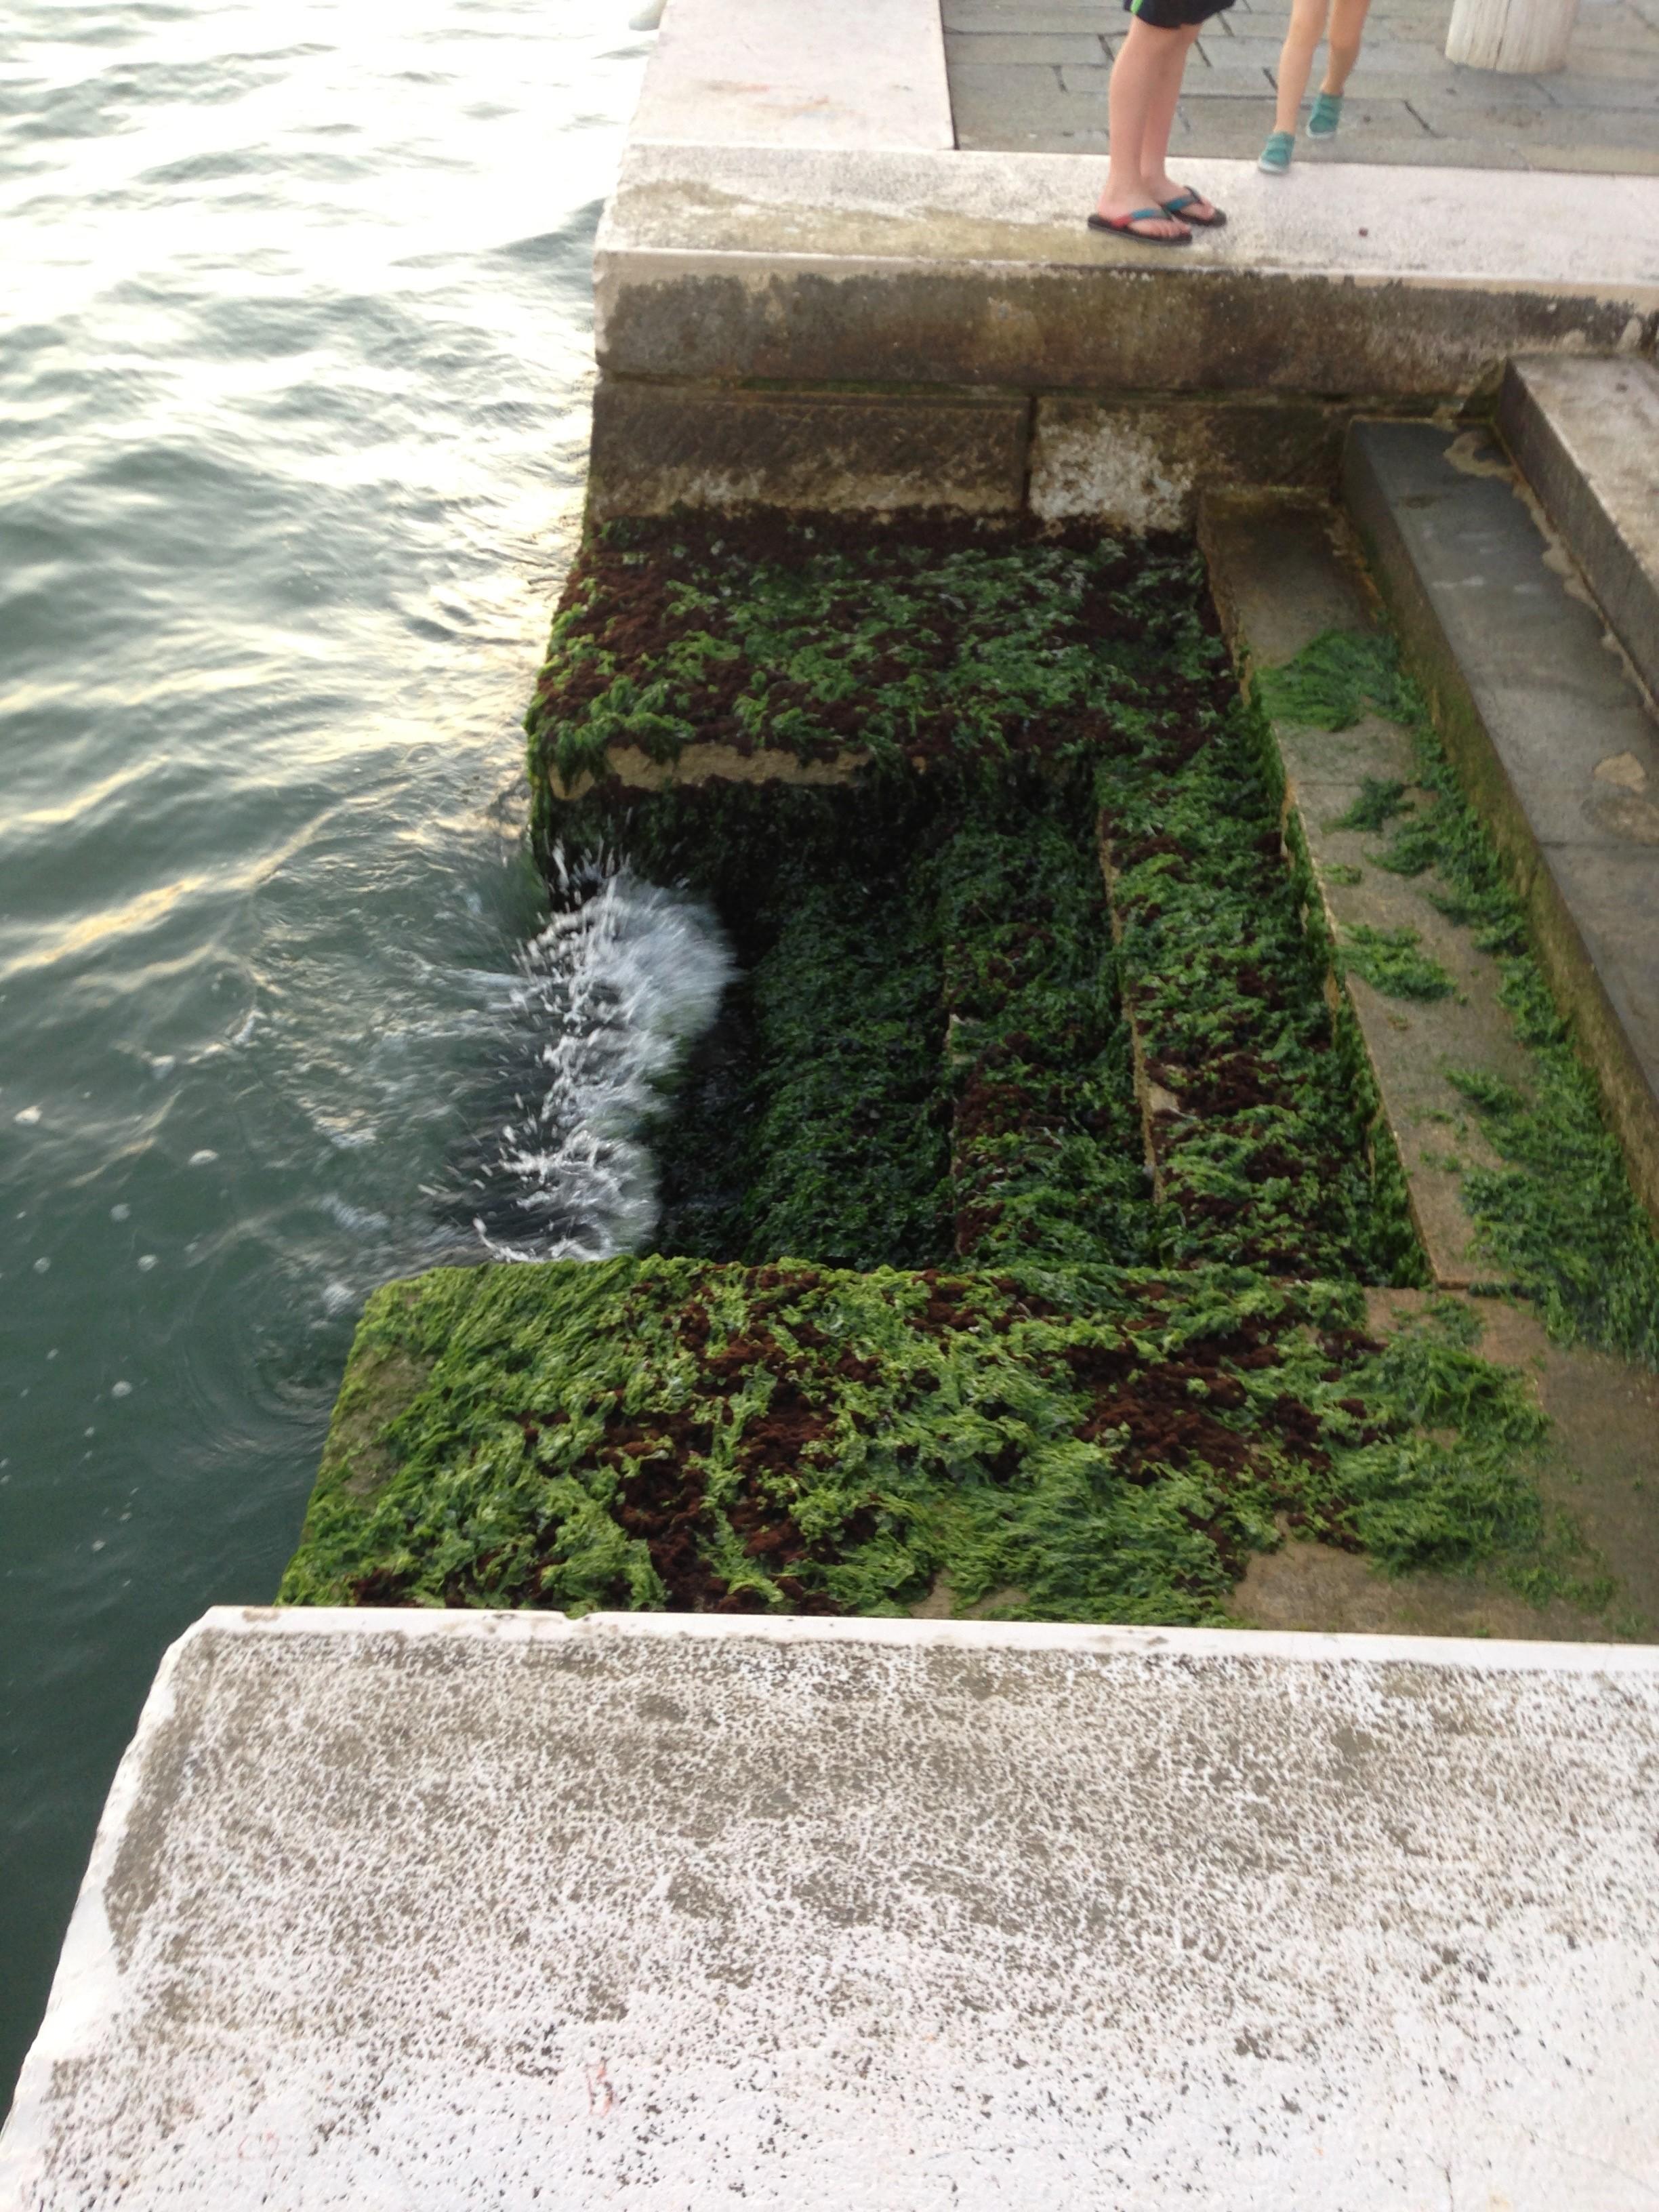 Moss covered steps in the sinking city of Venice.